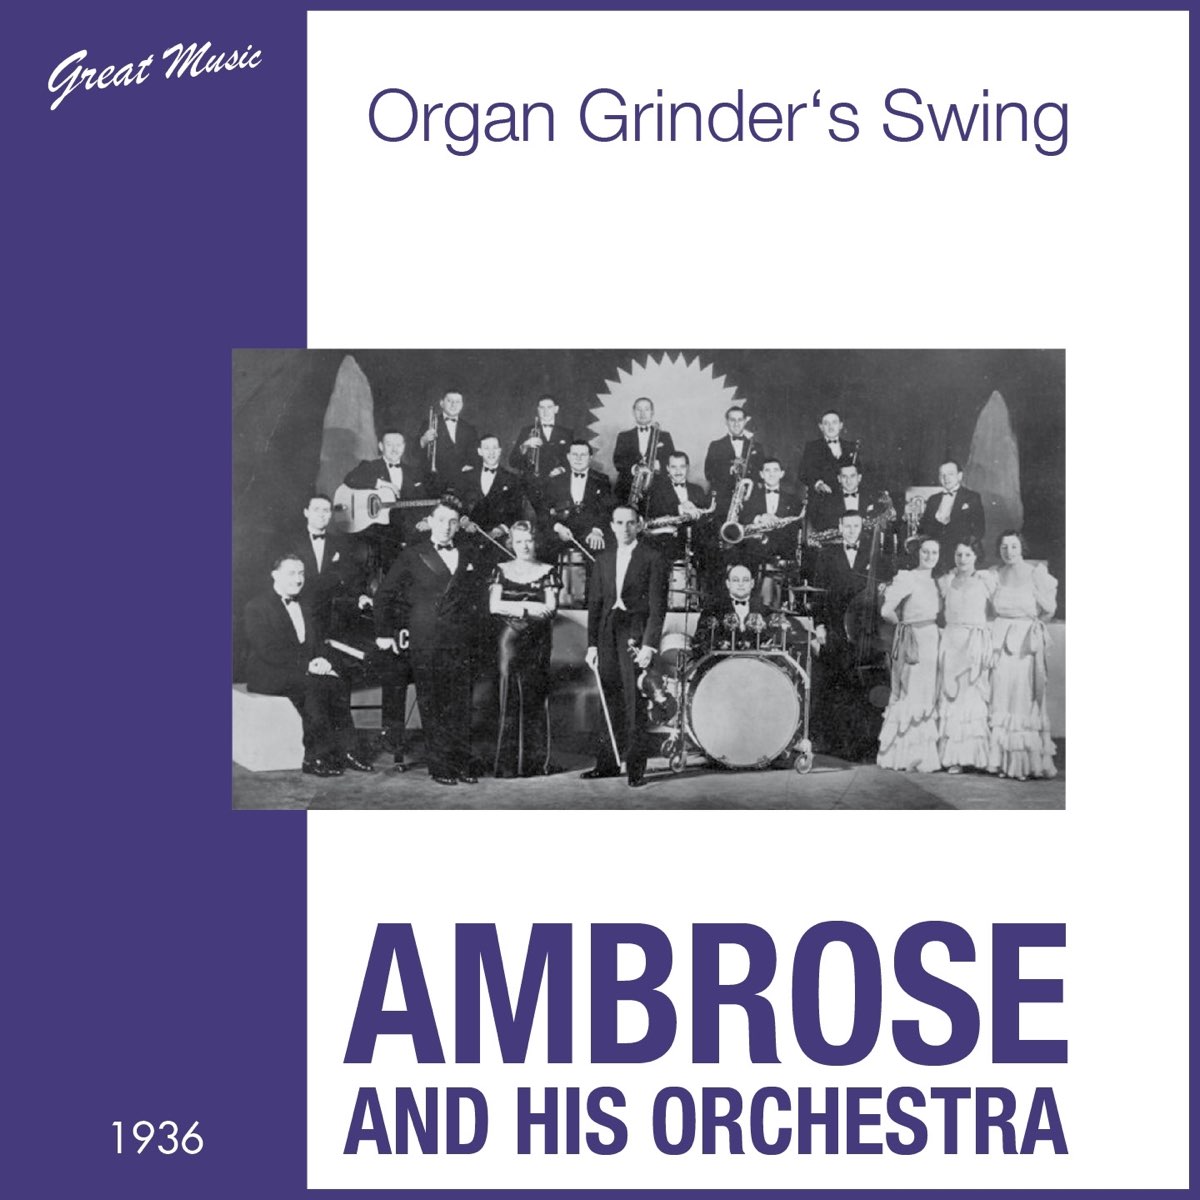 Organ Grinder's Swing (1936) by Ambrose and His Orchestra on Apple Music